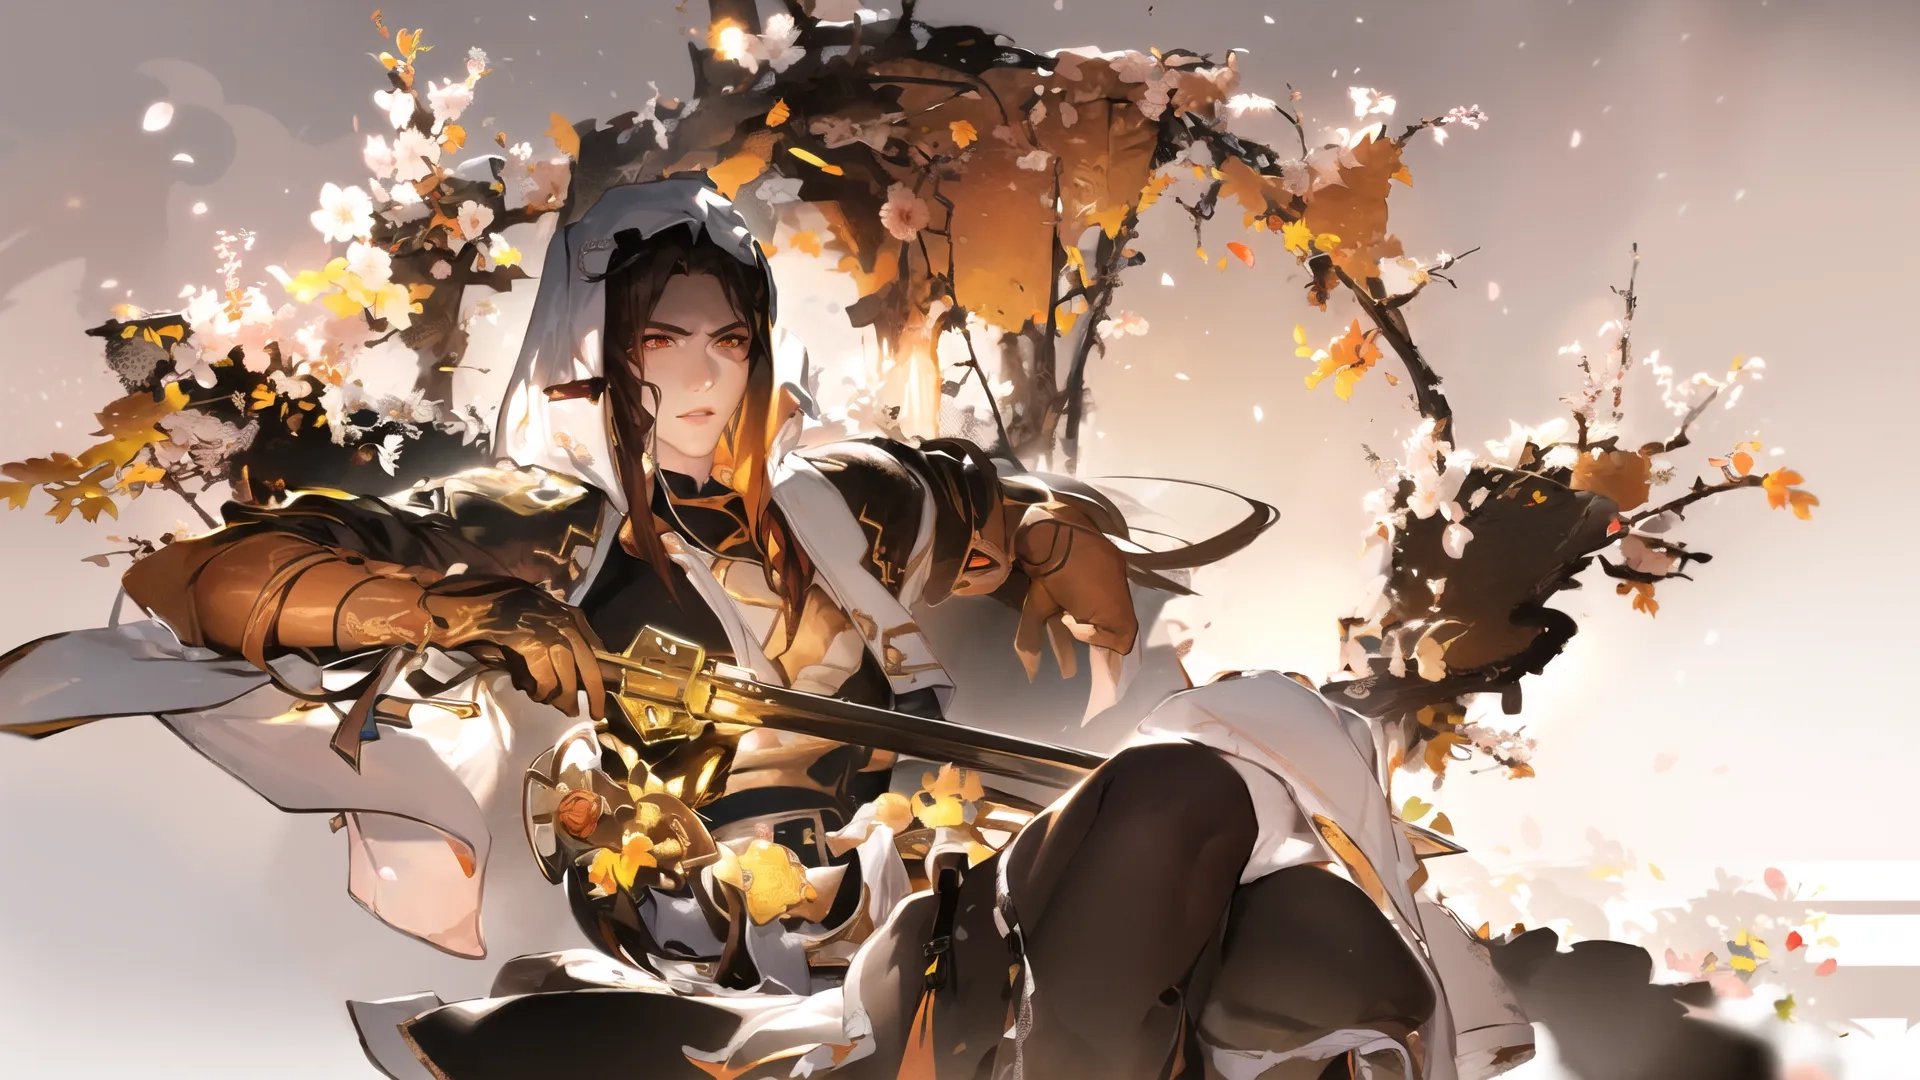 a woman in a costume holding a scythe blade and sword, surrounded by autumn leaves in front of the sky and sun flares behind her
